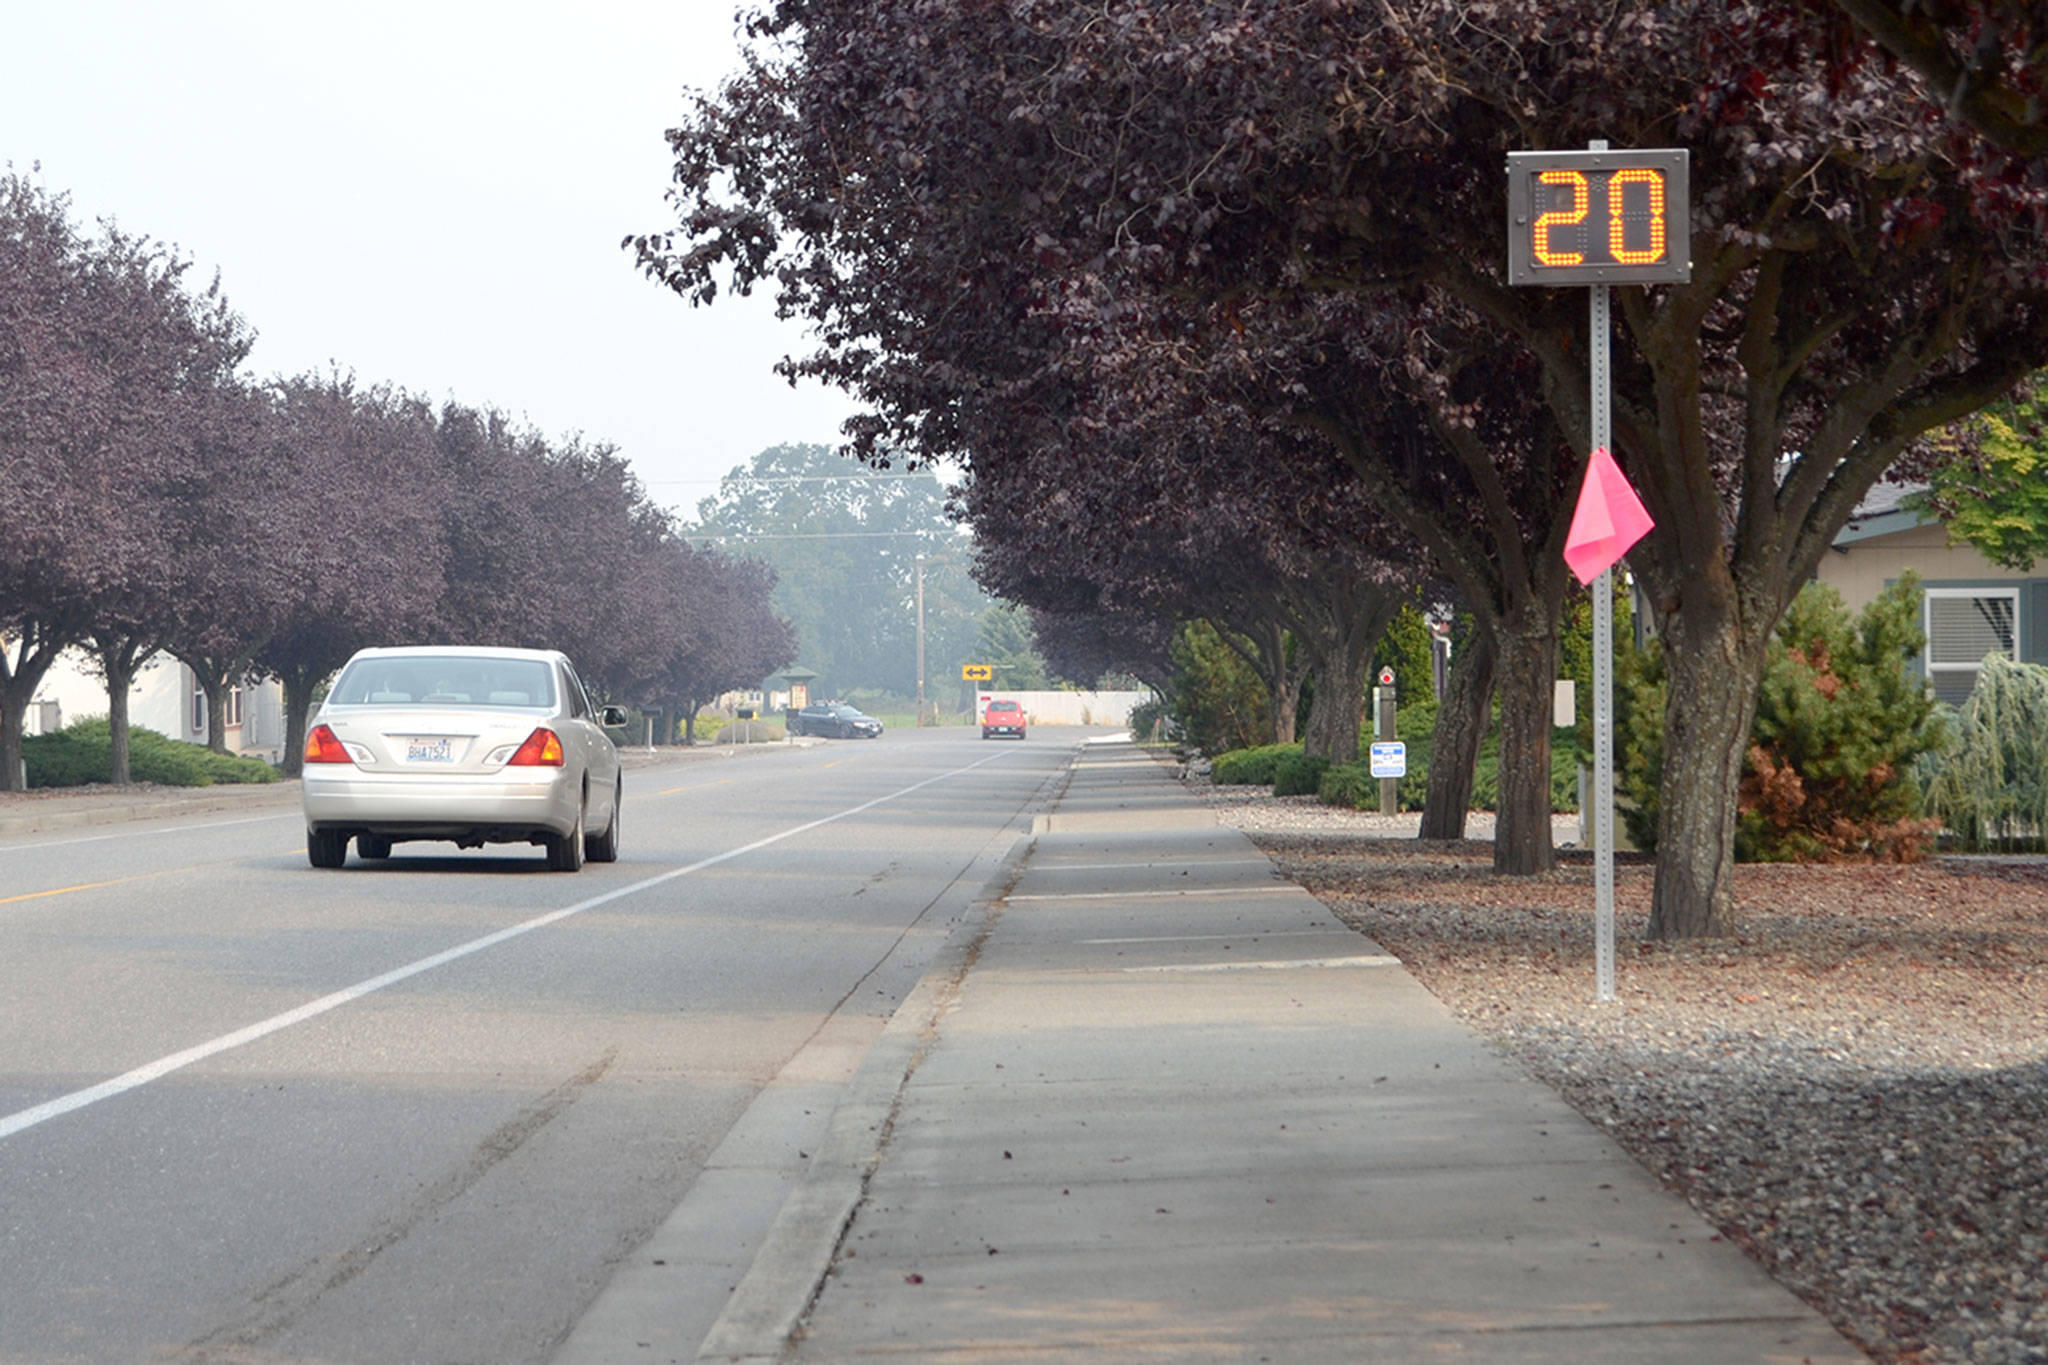 Battery-powered radar signs on Seventh Avenue are expected to be replaced with solar-powered signs by October. (Matthew Nash/Olympic Peninsula News Group)